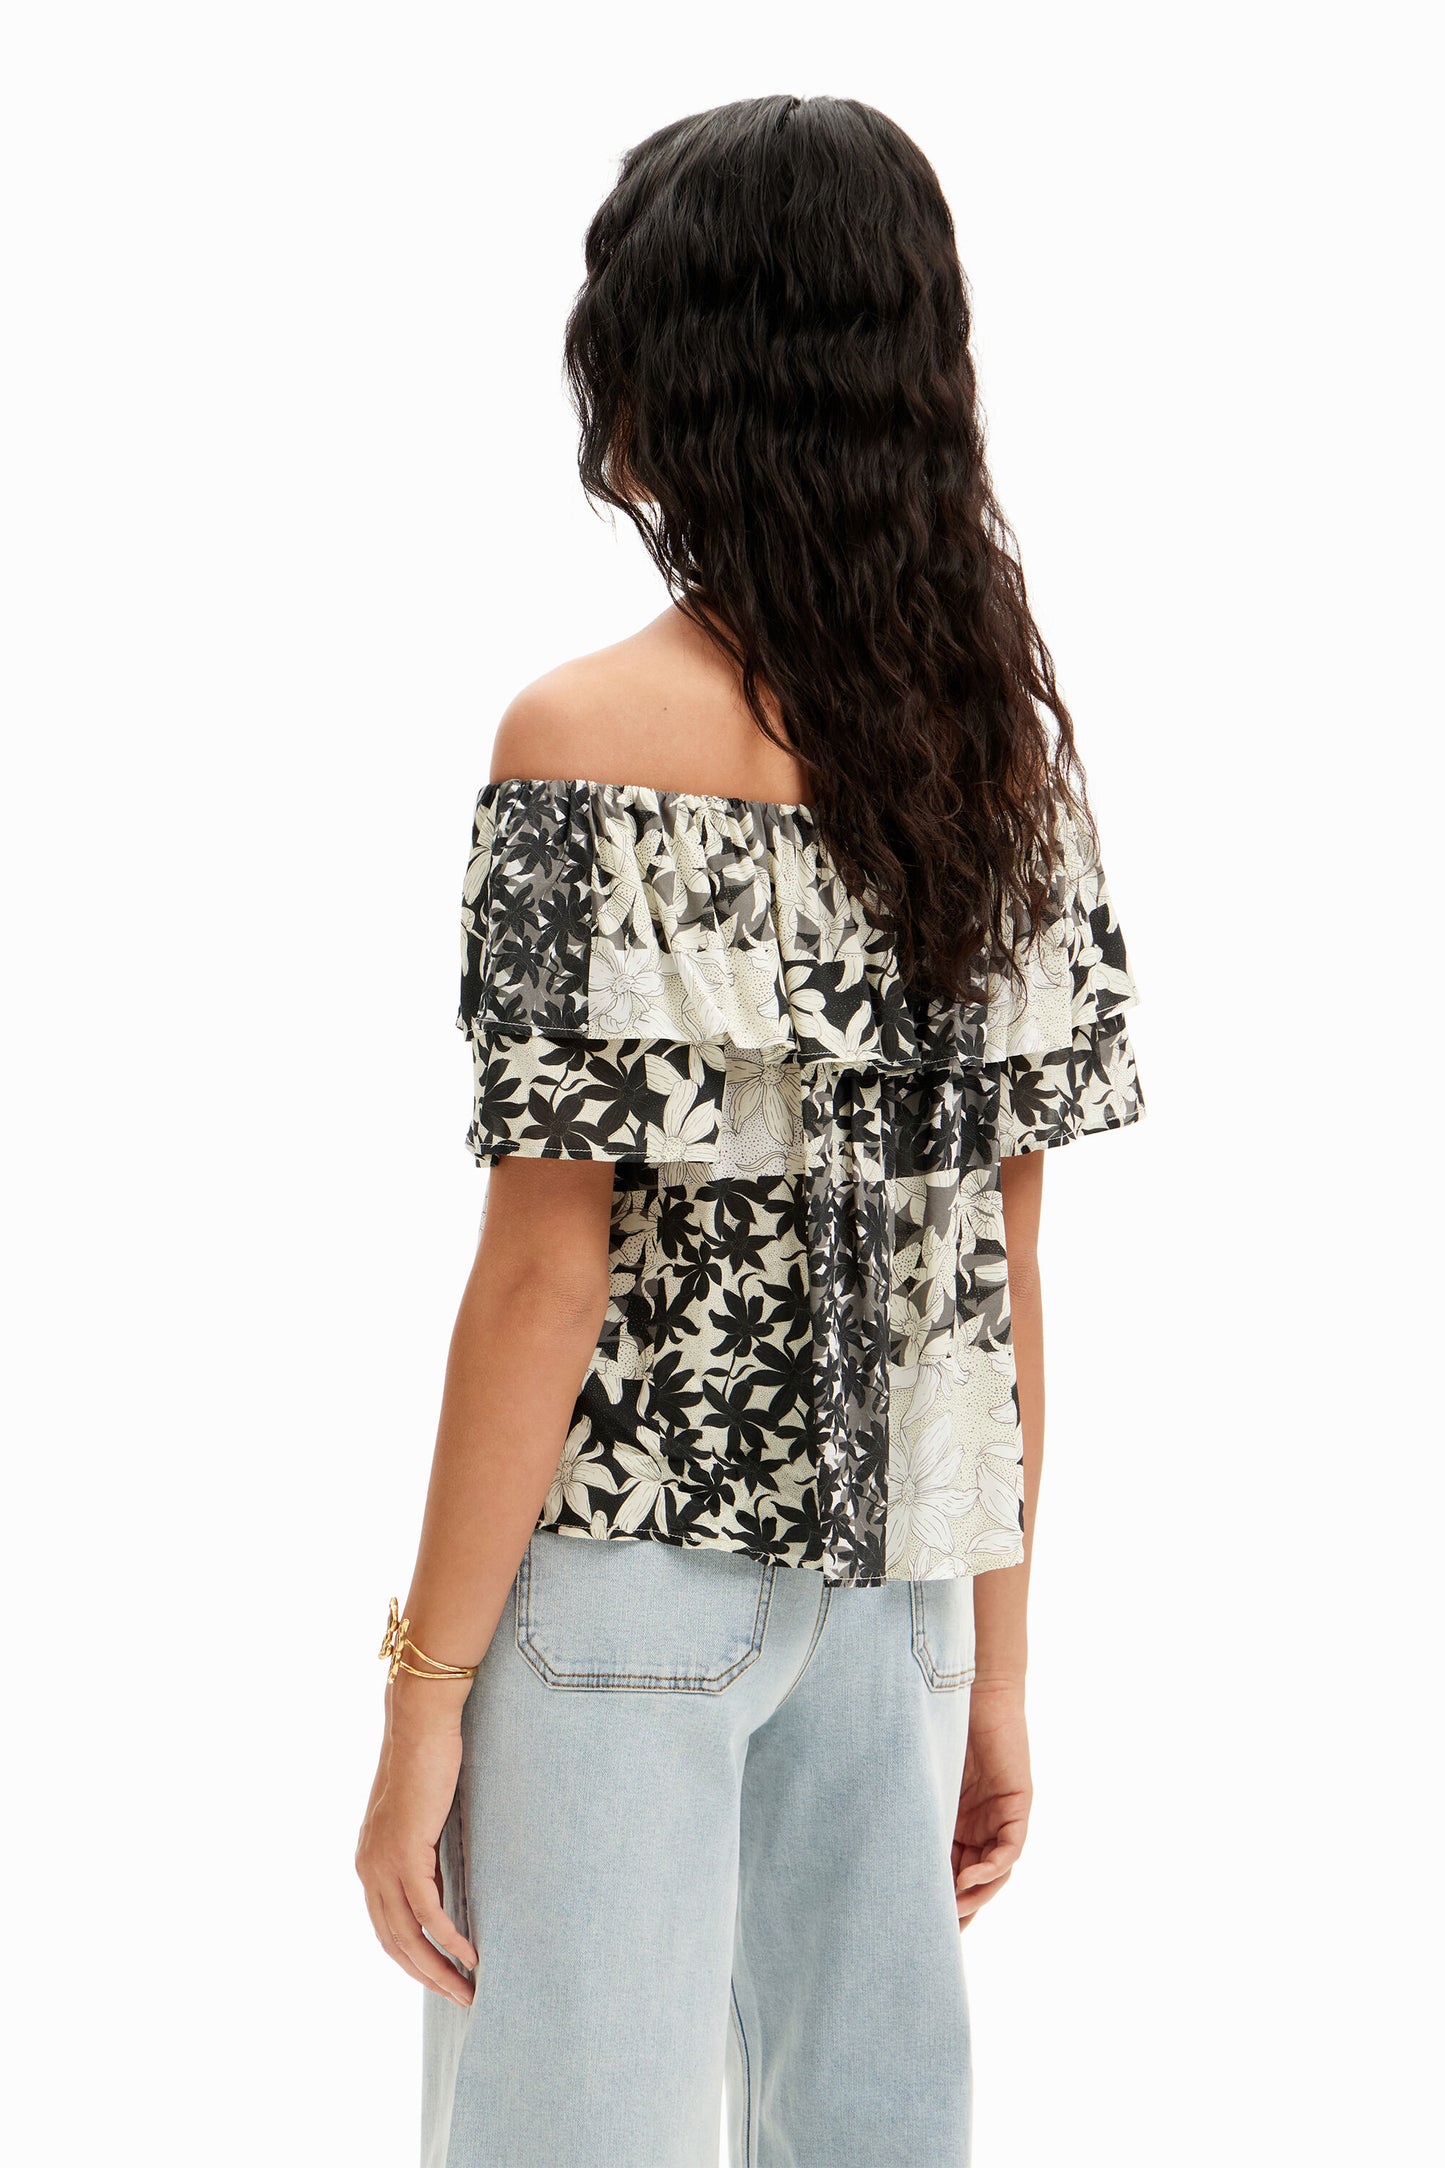 Desigual White Patchwork Floral Ruffle Blouse